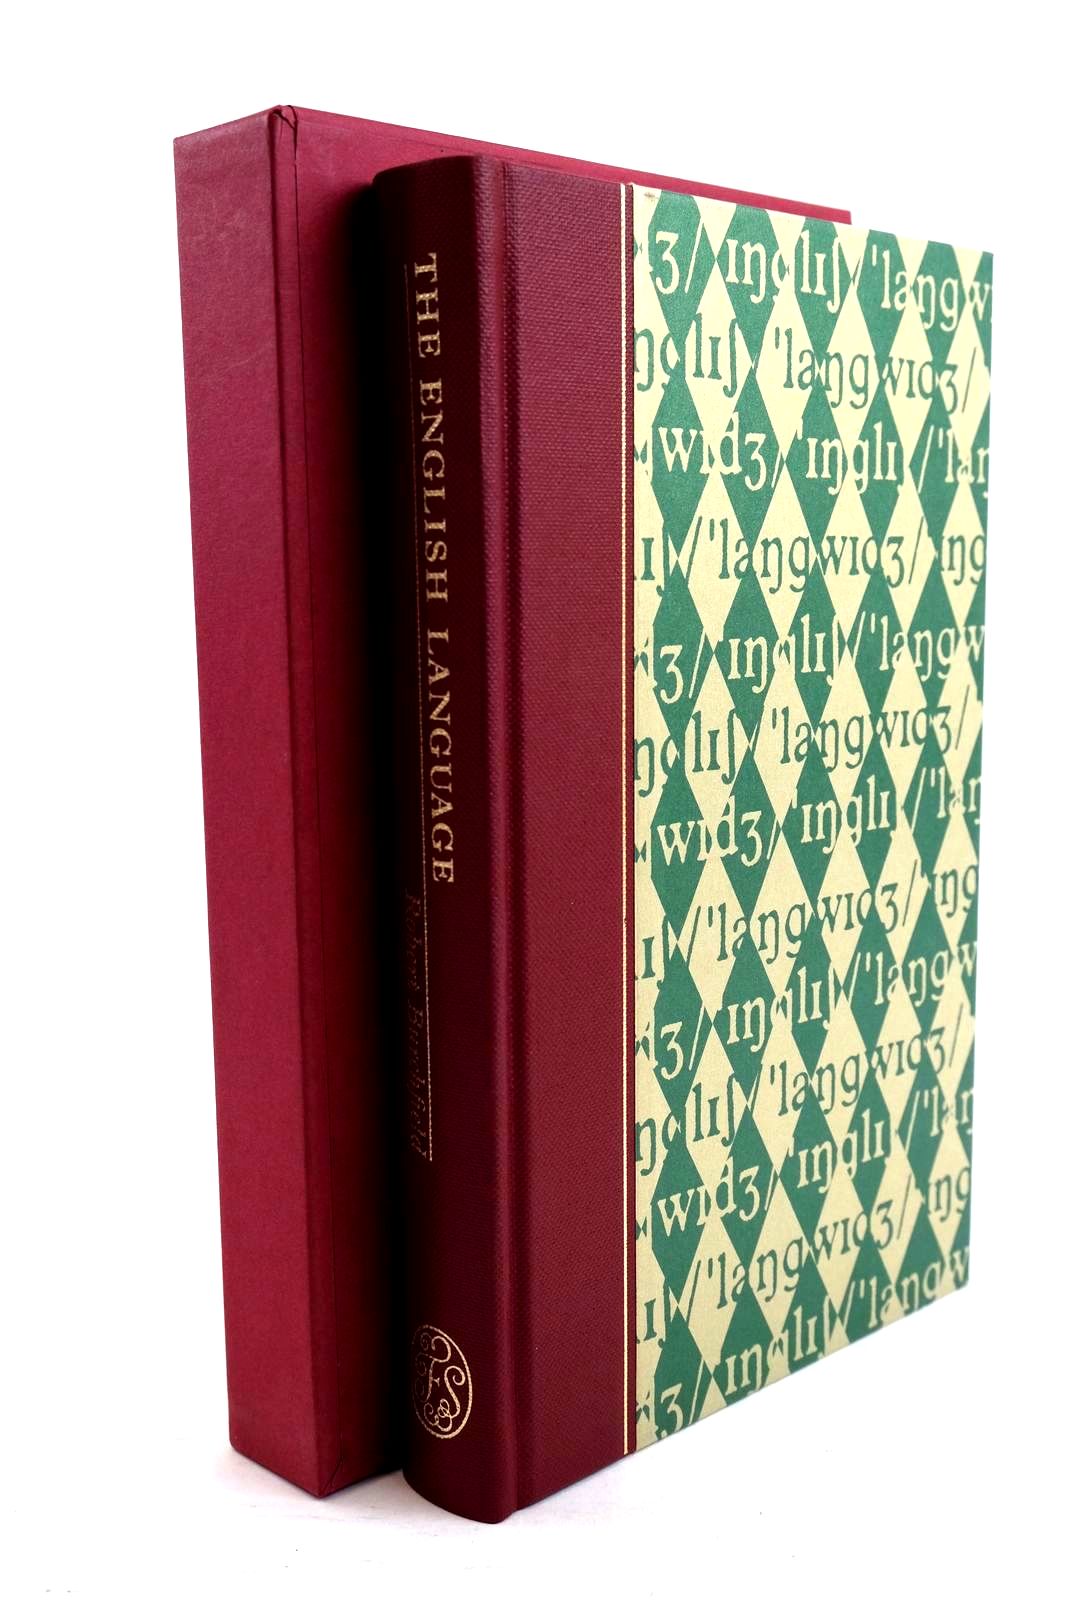 Photo of THE ENGLISH LANGUAGE written by Burchfield, Robert McCrum, Robert Simpson, John published by Folio Society (STOCK CODE: 1320661)  for sale by Stella & Rose's Books